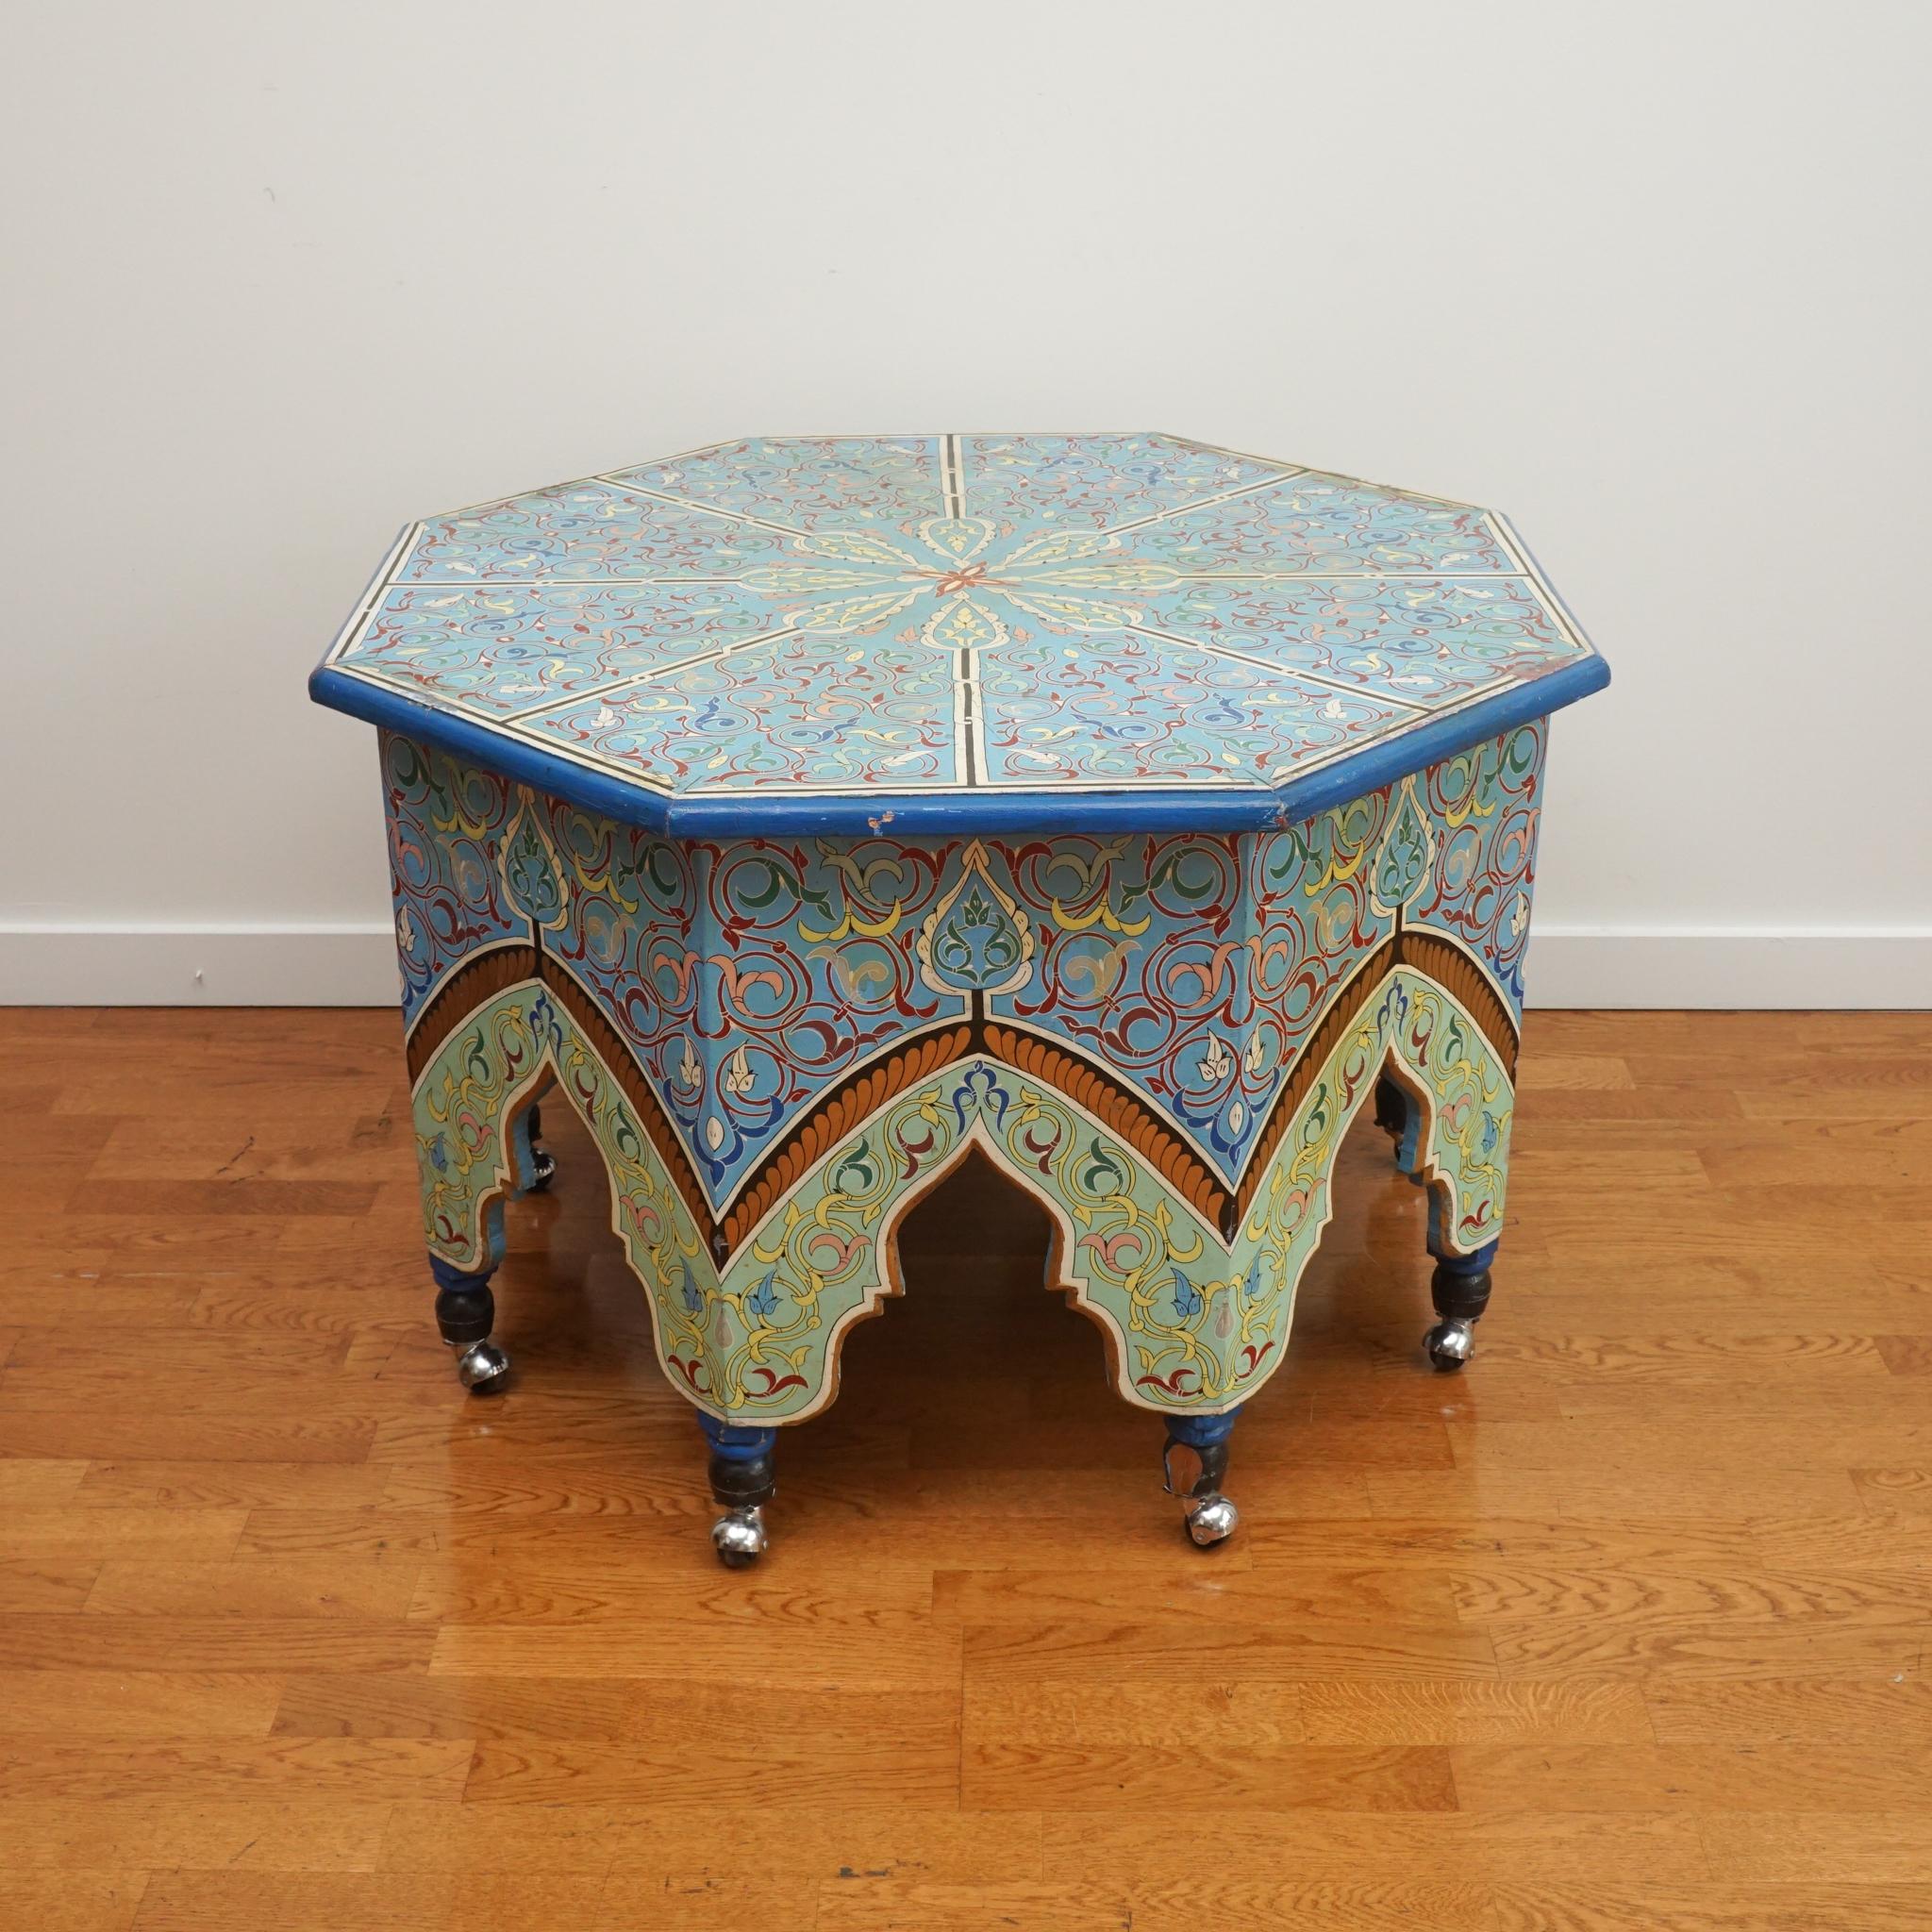 The octagonal-shaped Moroccan-style table, shown here, is notable for its design, pattern and color. Intricately painted top to bottom, the table is mounted on casters and exhibits rich color given its age.